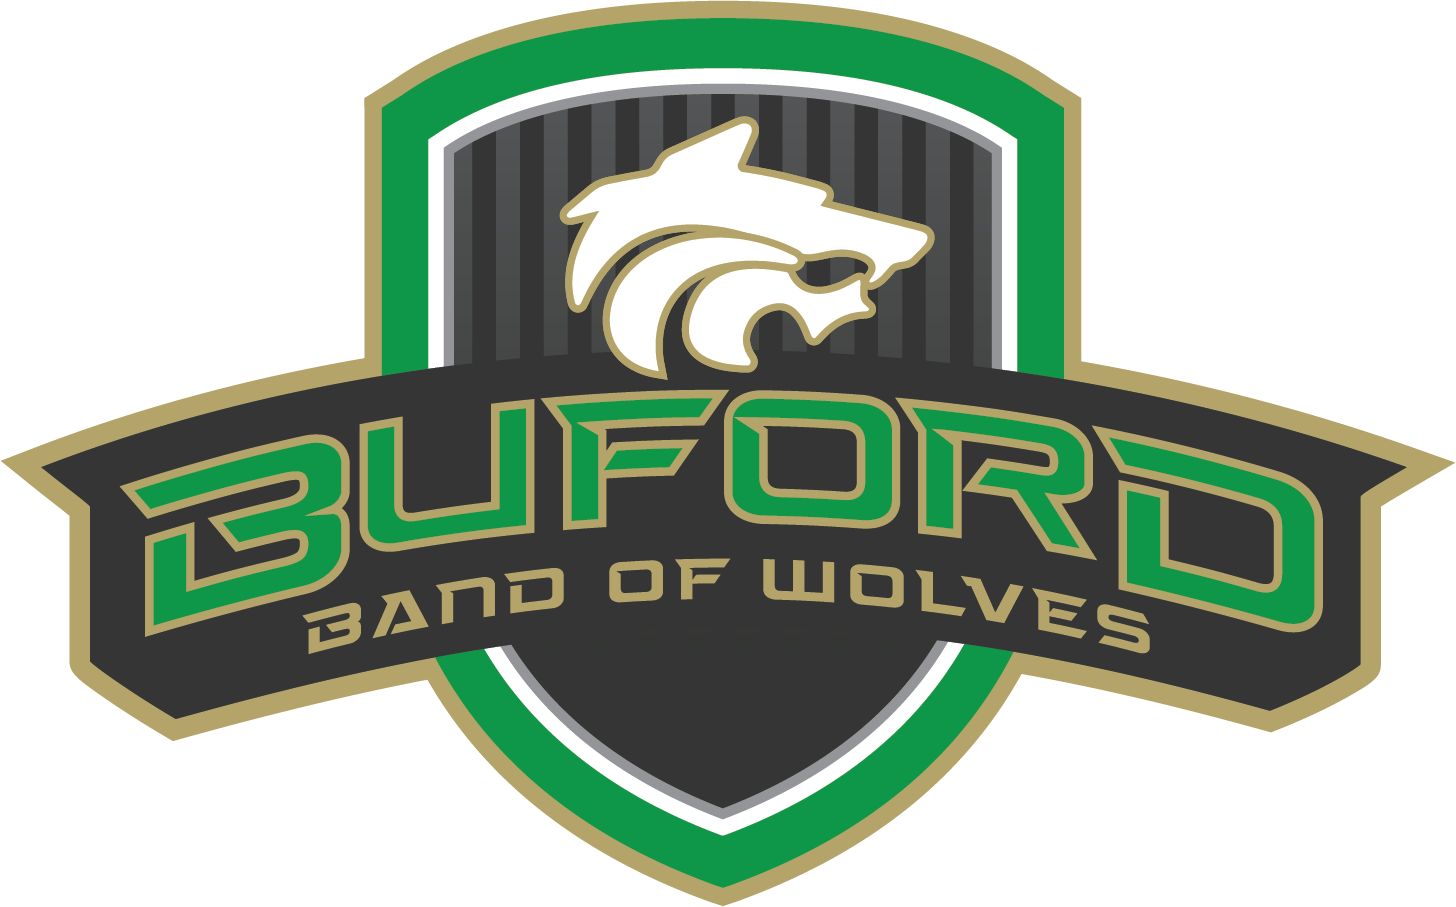 Buford Band of Wolves logo